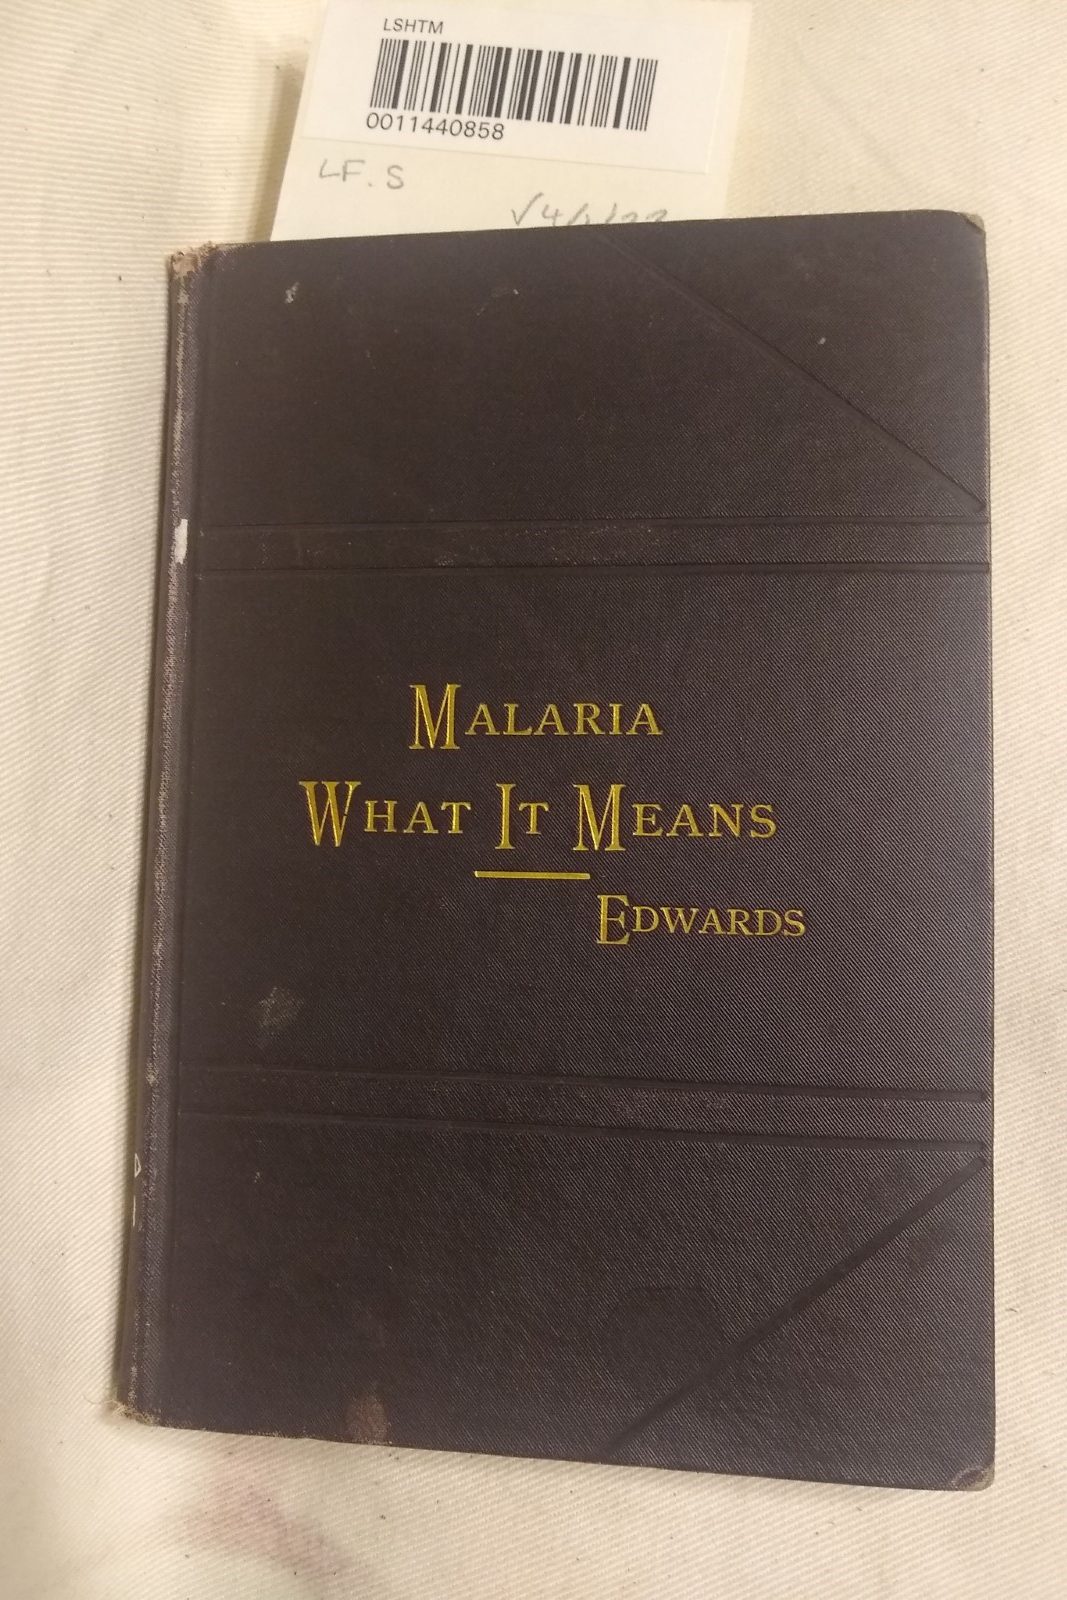 The cover of 'Malaria: what it means and how avoided,' in black with title and author surname in embossed gold letters.